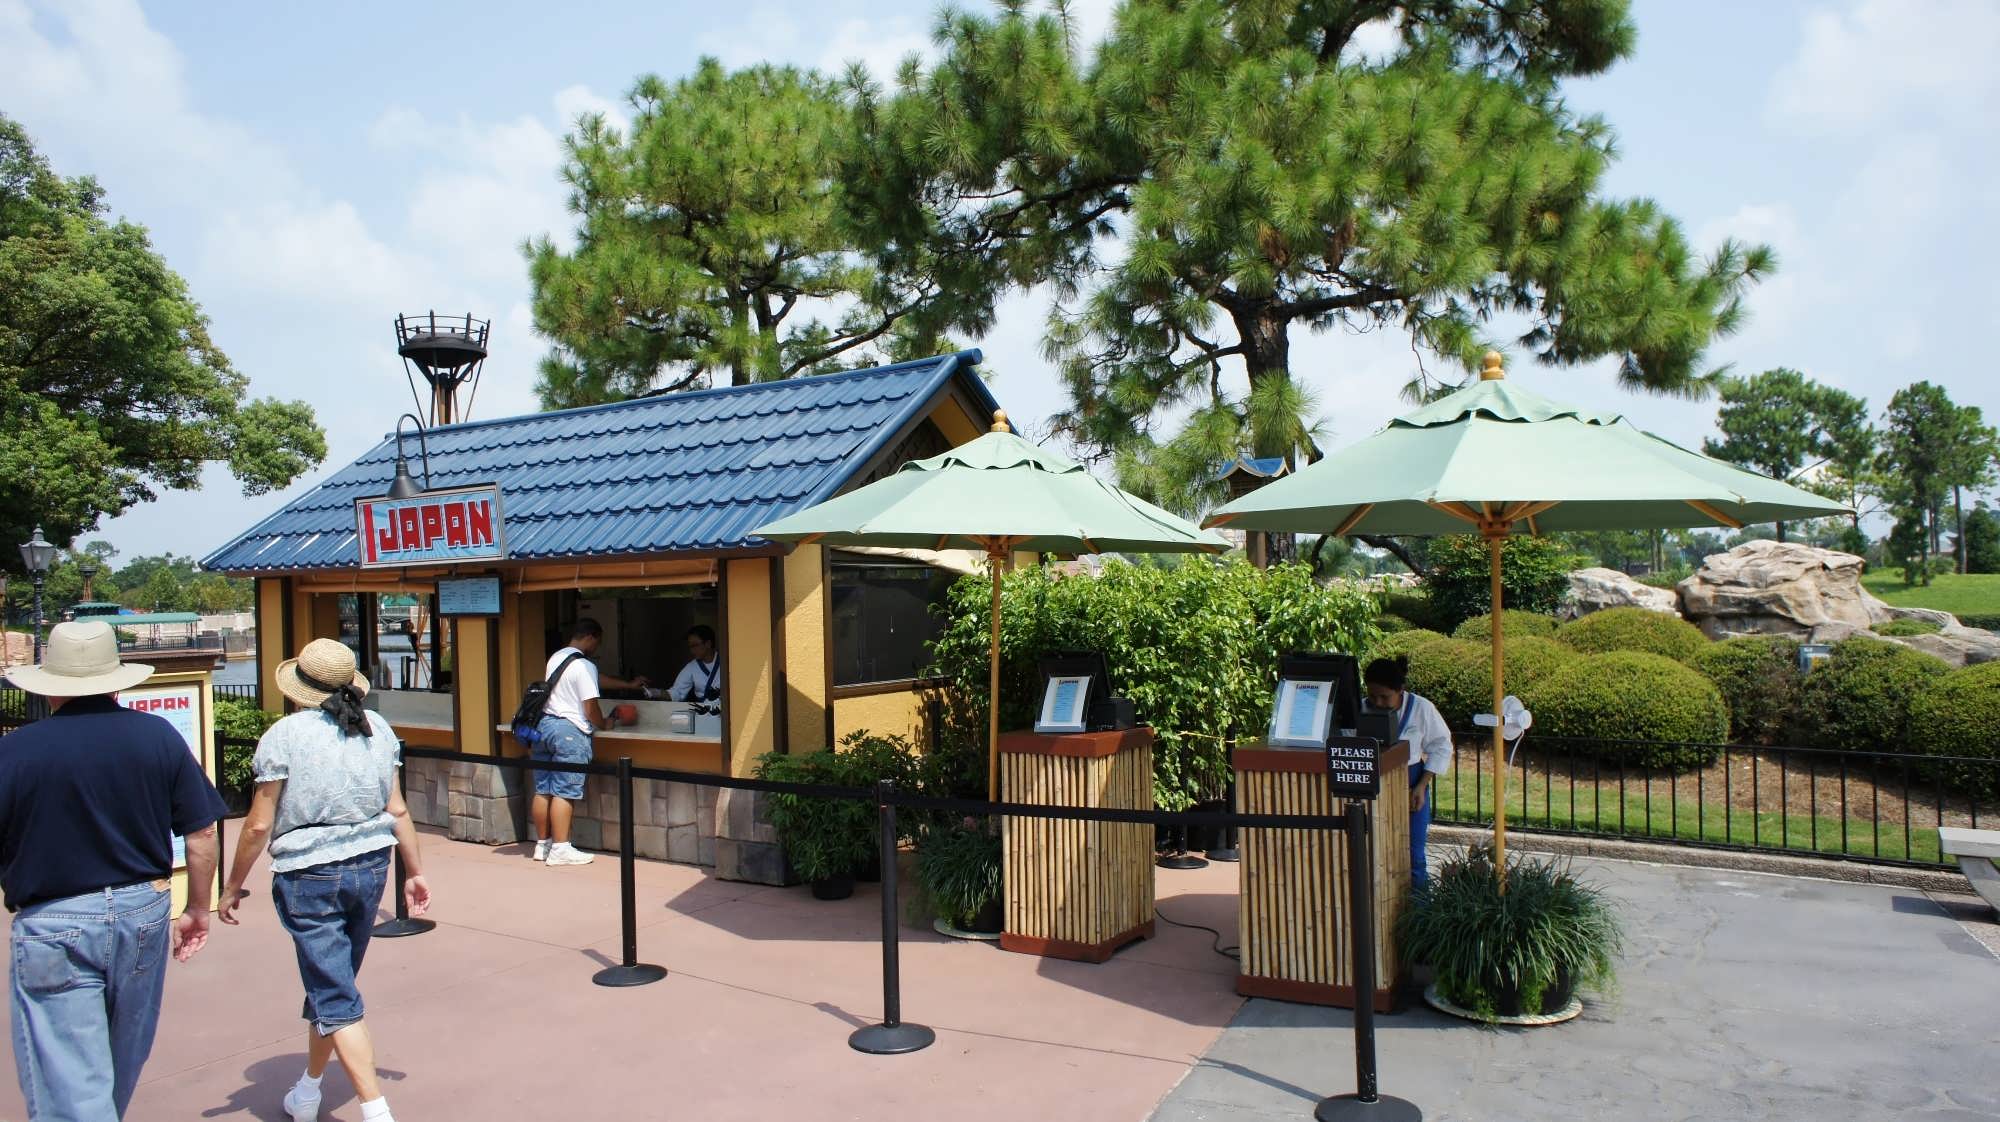 Disney making some changes to the Epcot's Japan Pavilion